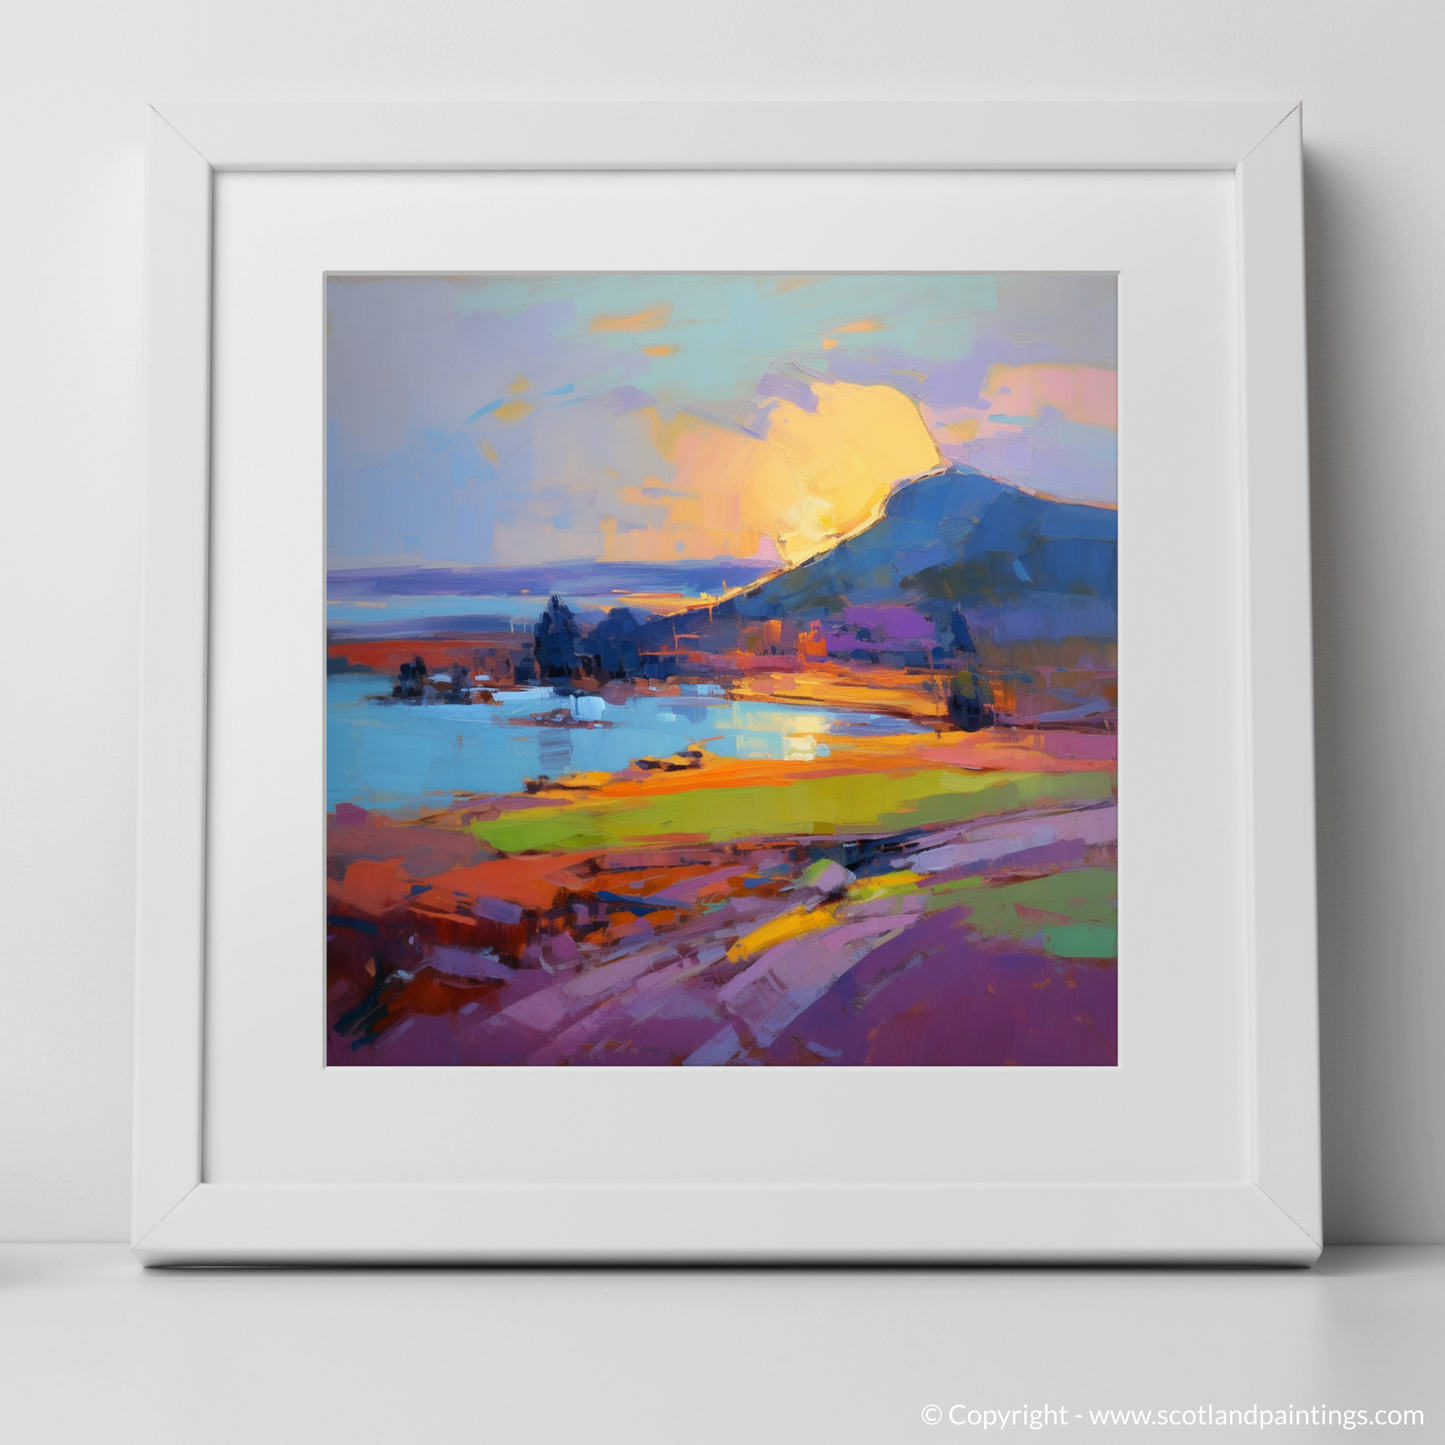 Coldingham Bay at Sunset: An Expressionist Ode to Scottish Shores